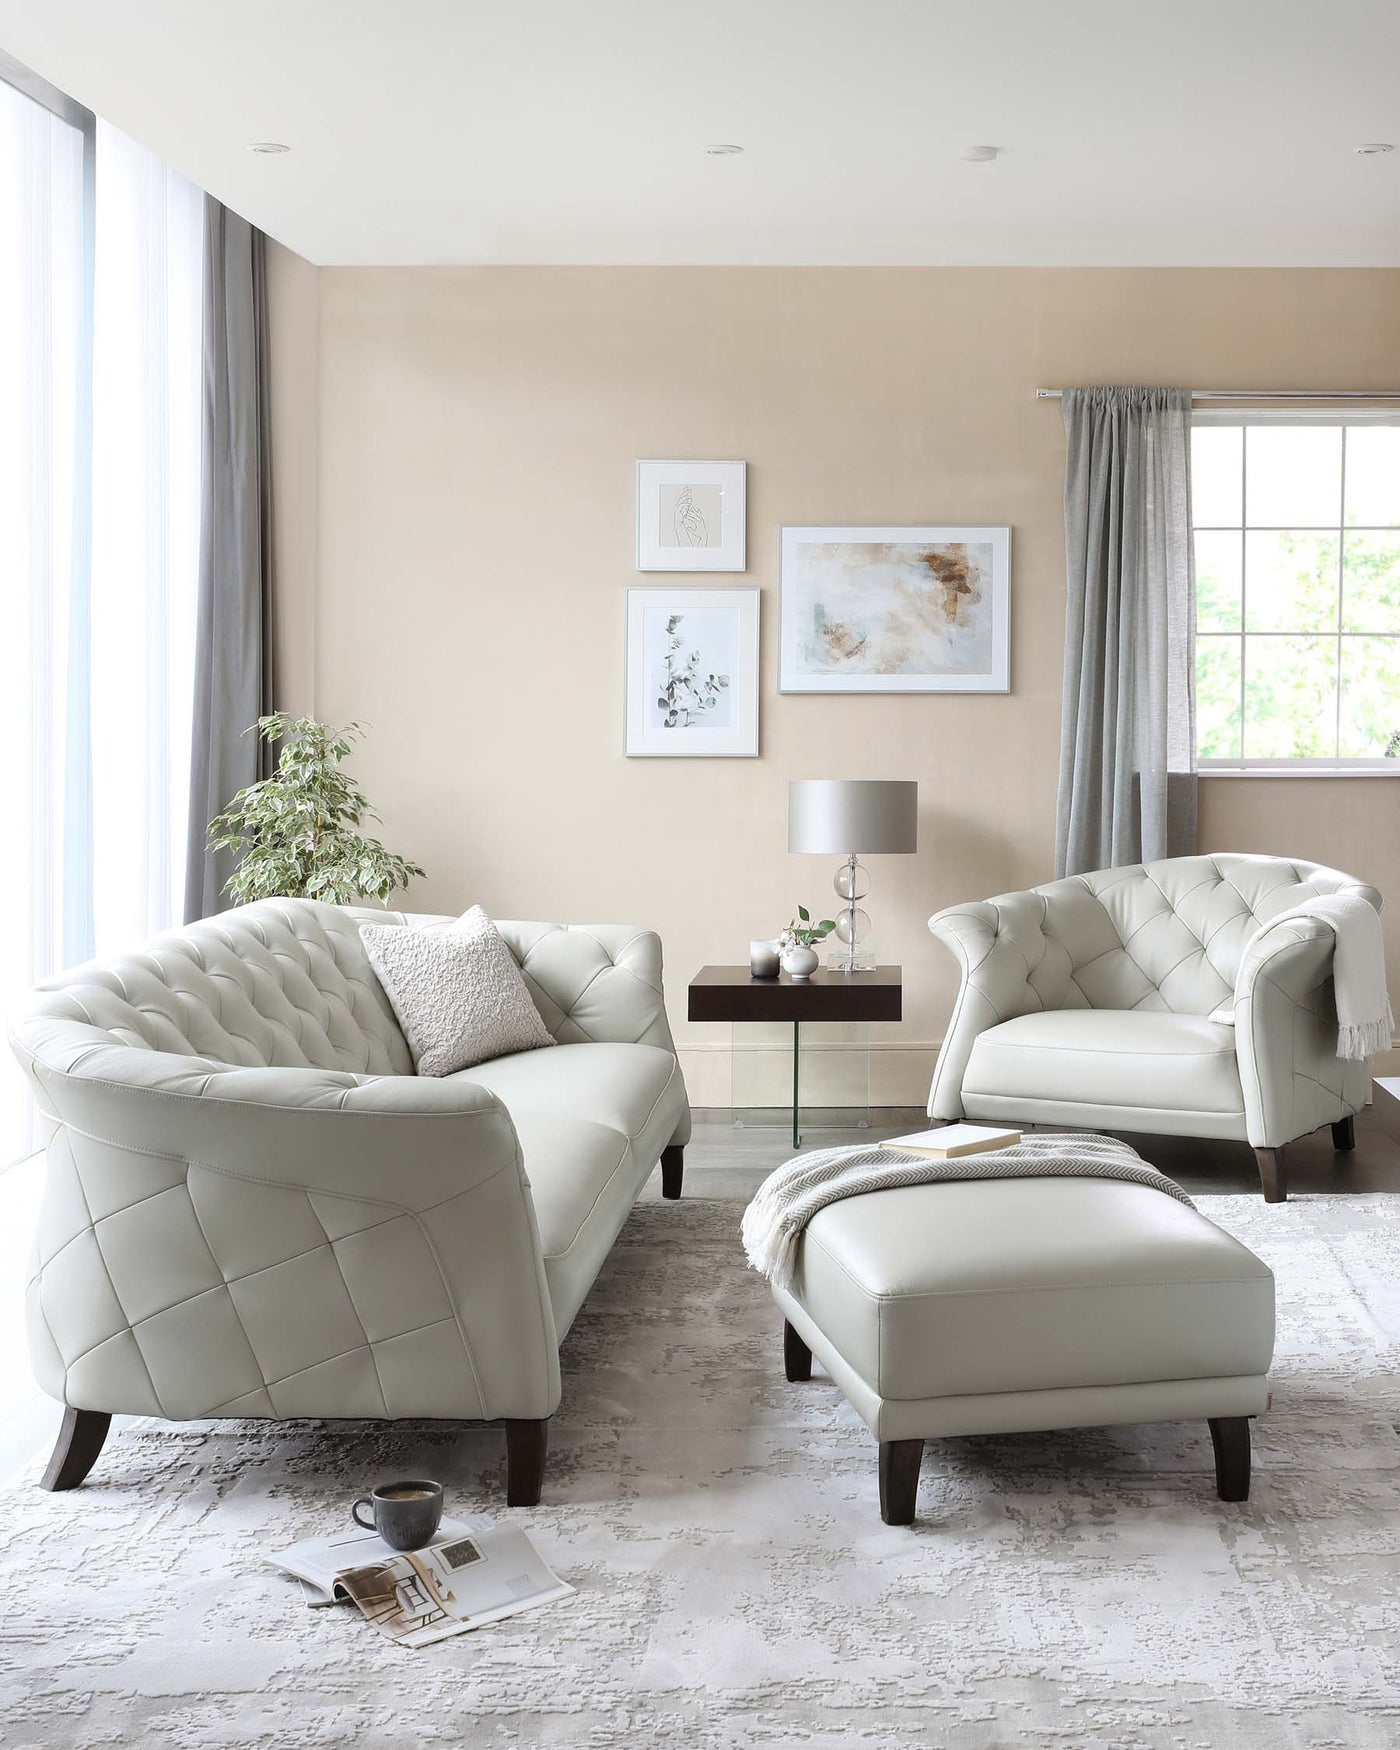 Elegant living room ensemble featuring a tufted cream-colored sofa with matching armchair, both with a quilted diamond-pattern backrest and curved arms. A coordinating ottoman rests in front, atop a textured white and grey area rug. A small rectangular wooden side table with a modern lamp sits beside the armchair. The room is accented with minimalist wall art, grey drapery, and a potted indoor plant.